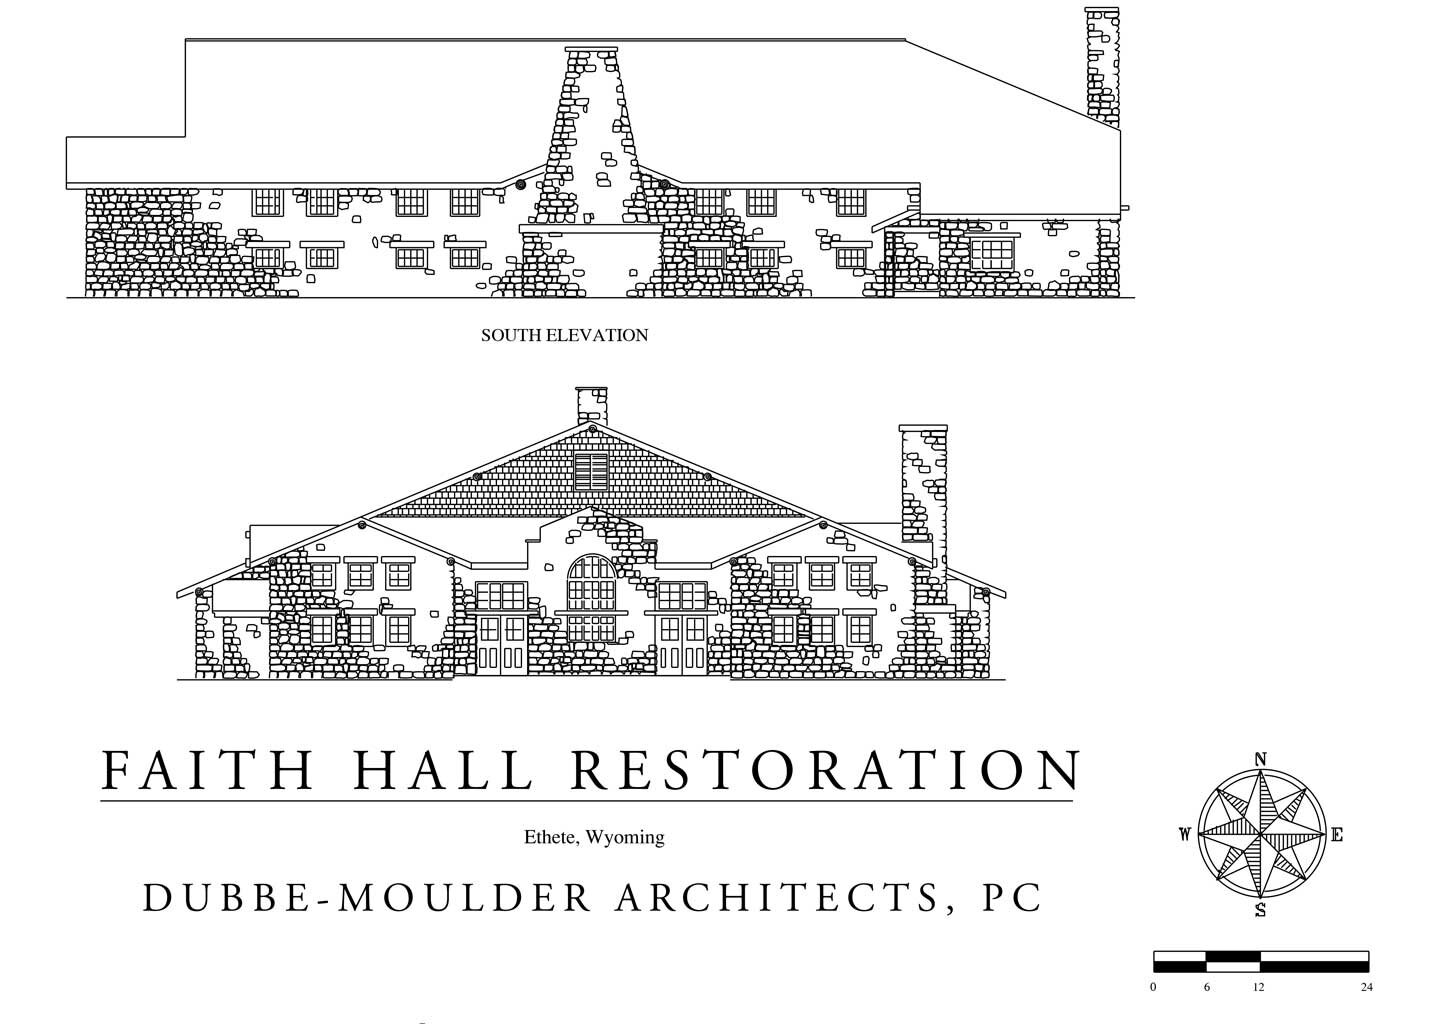 Faith Hall Restoration hand drawing with elevations